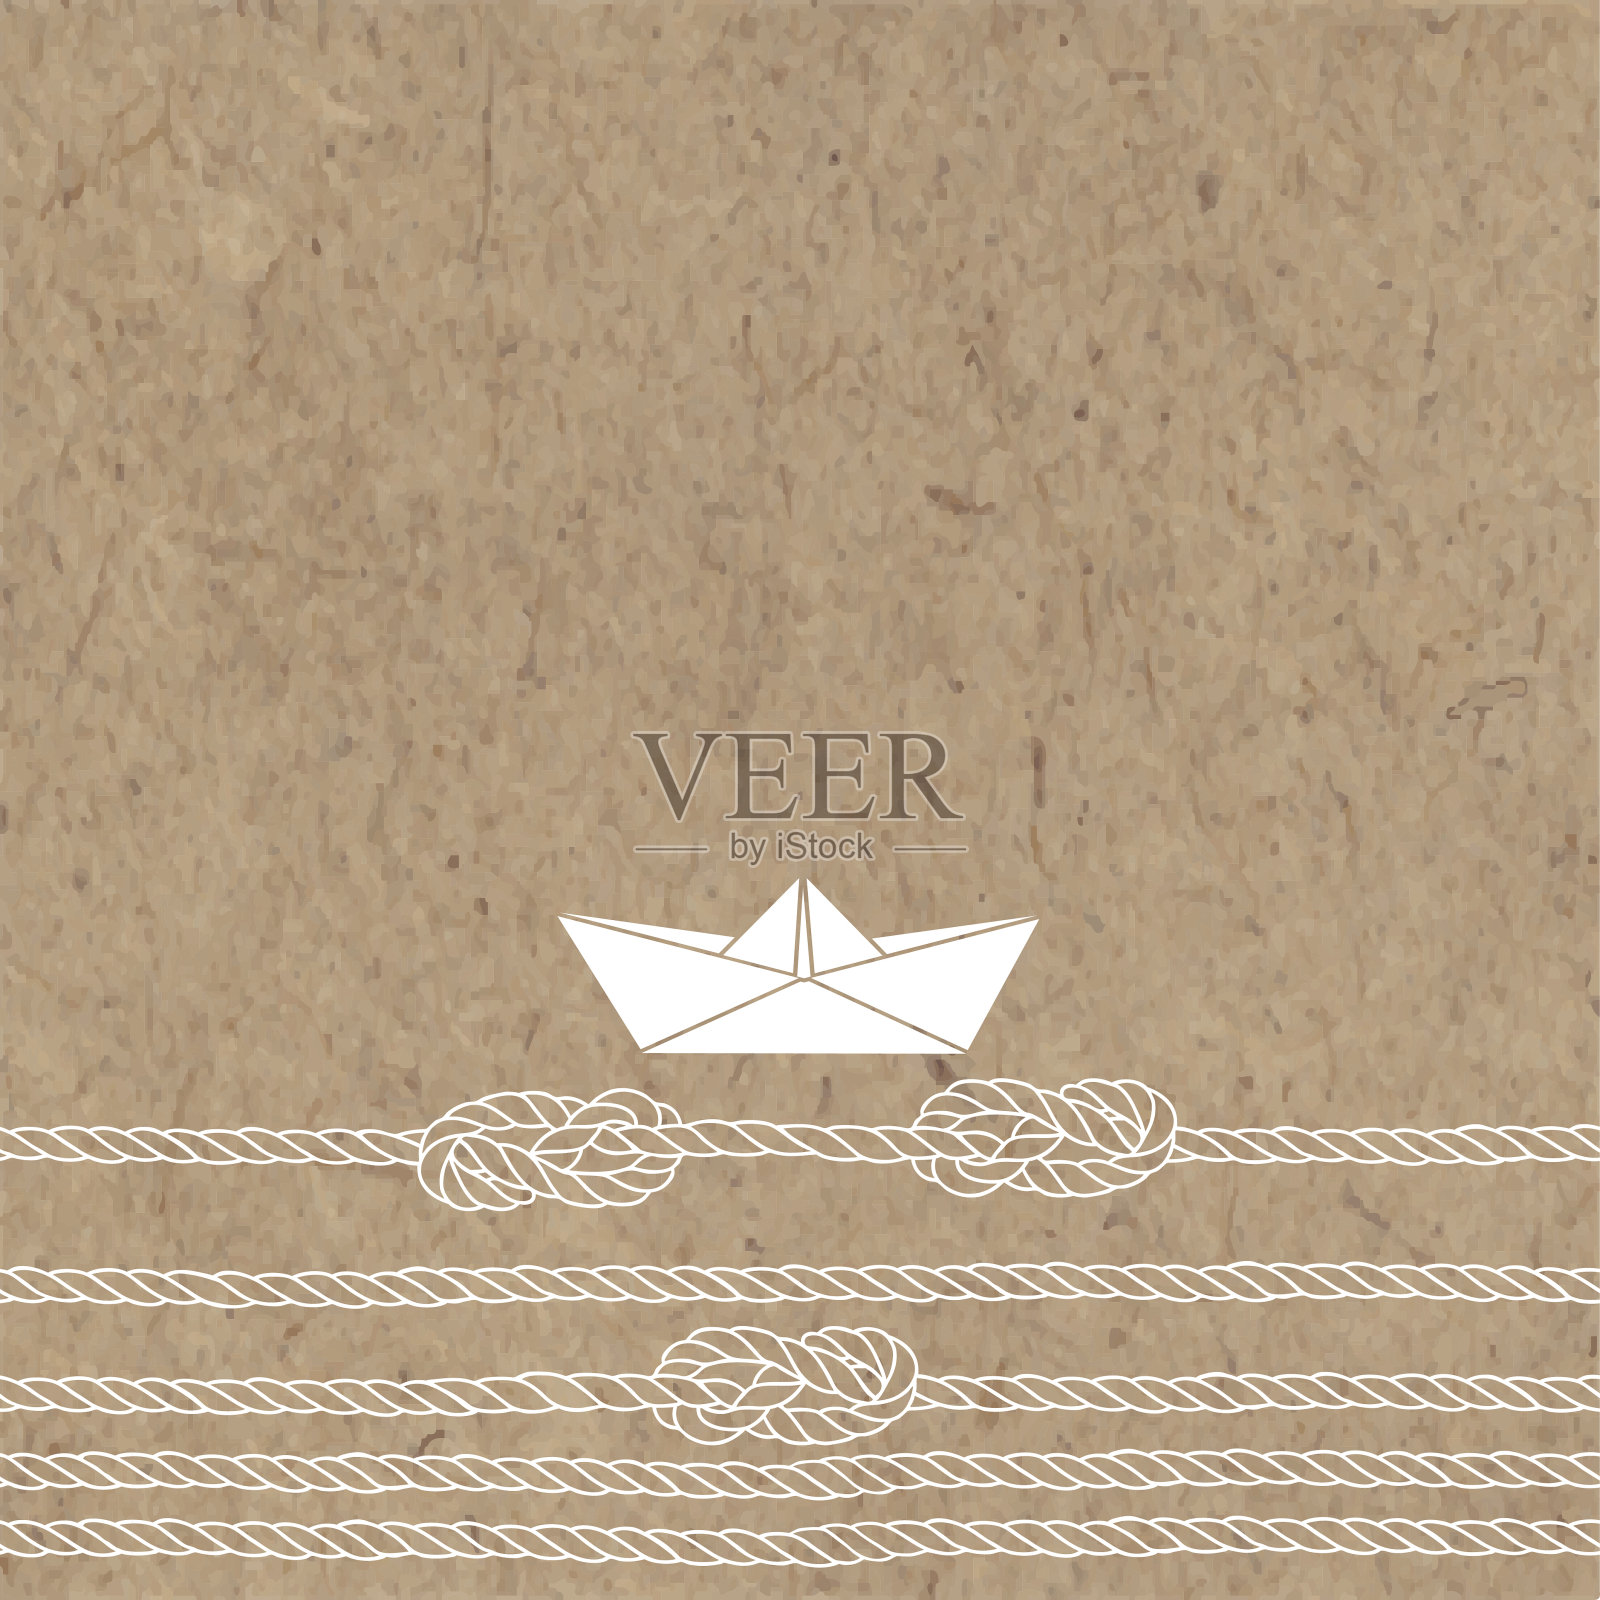 Vector illustration with paper boat,  sea ropes, knots  and  place for text on a kraft background.背景图片素材